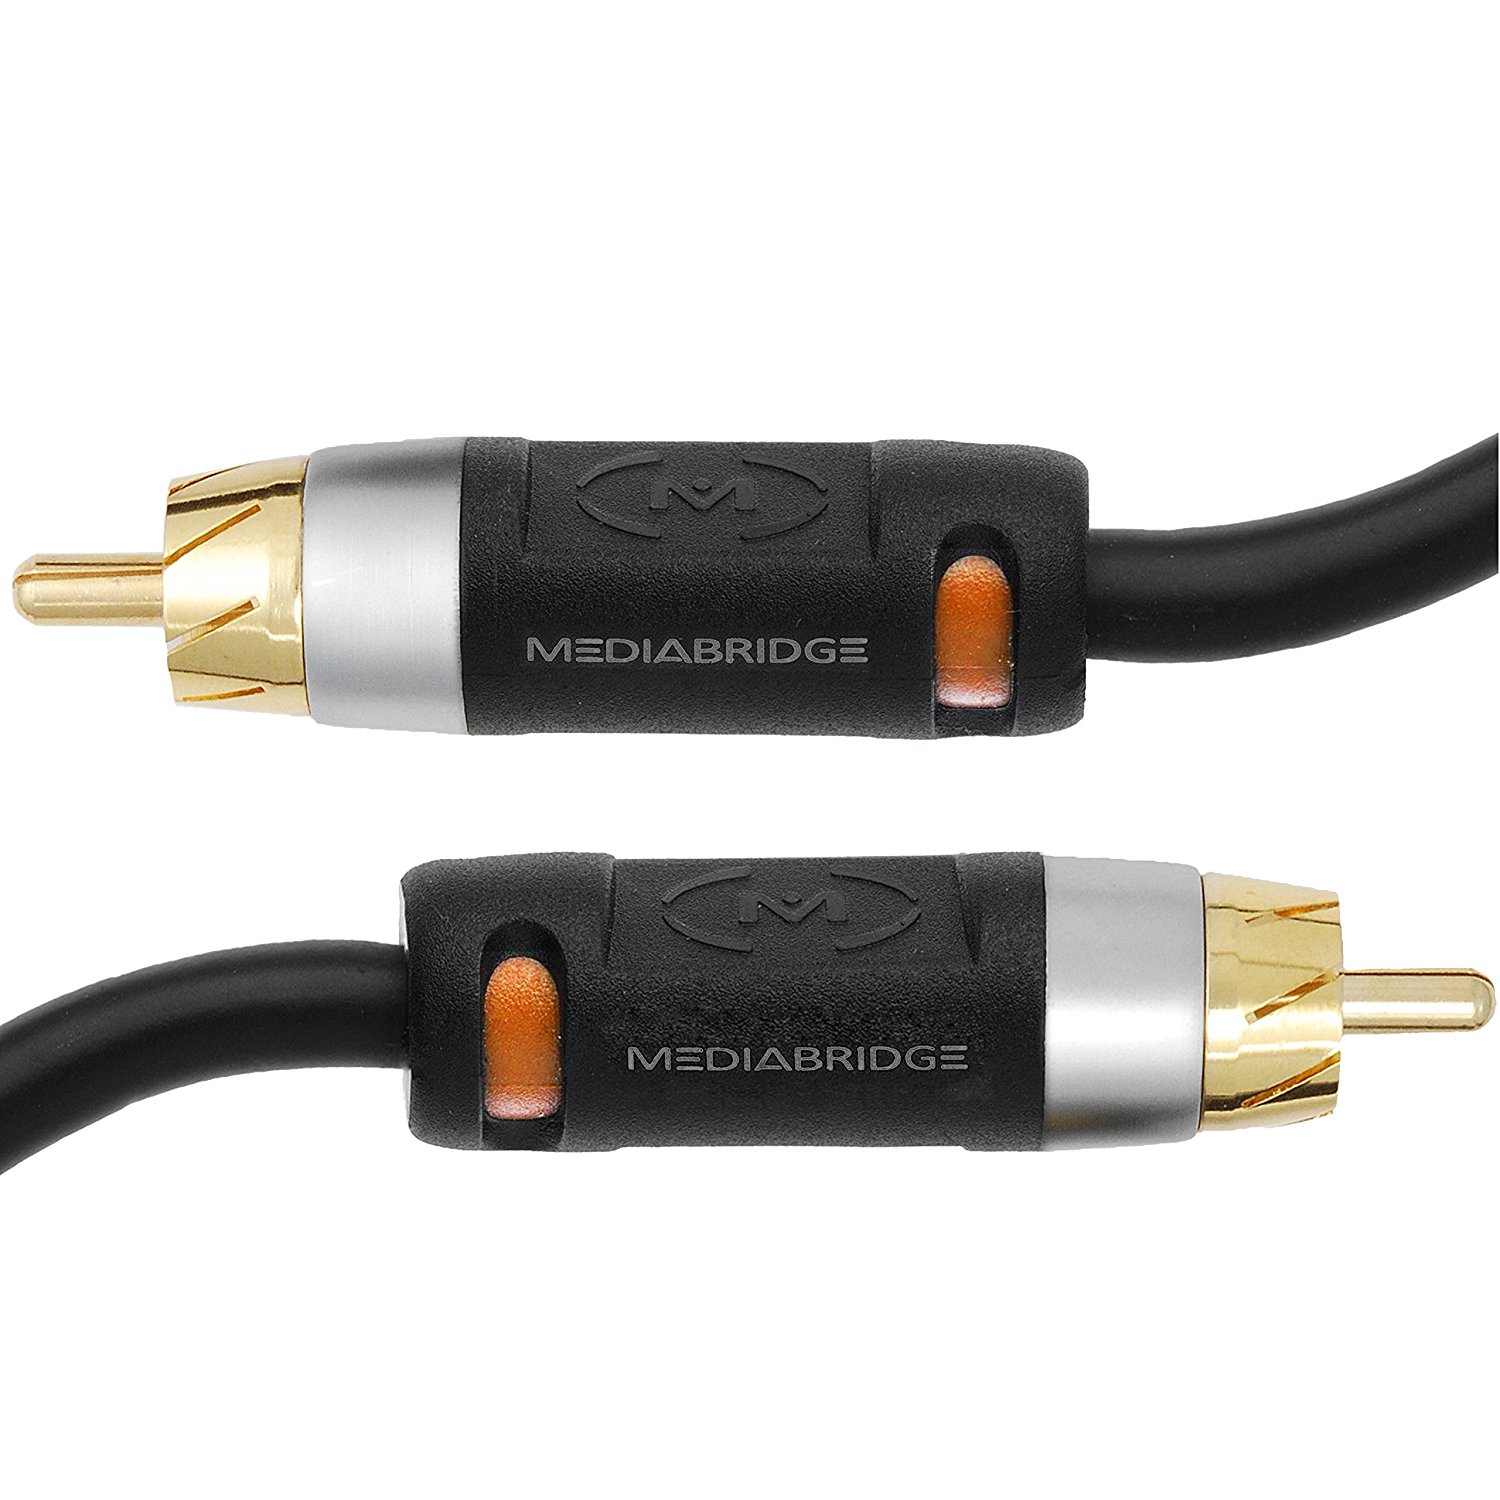 Mediabridge ULTRA Series Digital Audio Coaxial Cable (8 Feet) - Dual Shielded with RCA to RCA Gold-Plated Connectors - Black - (Part# CJ08-6BR-G2 ) - image 2 of 4